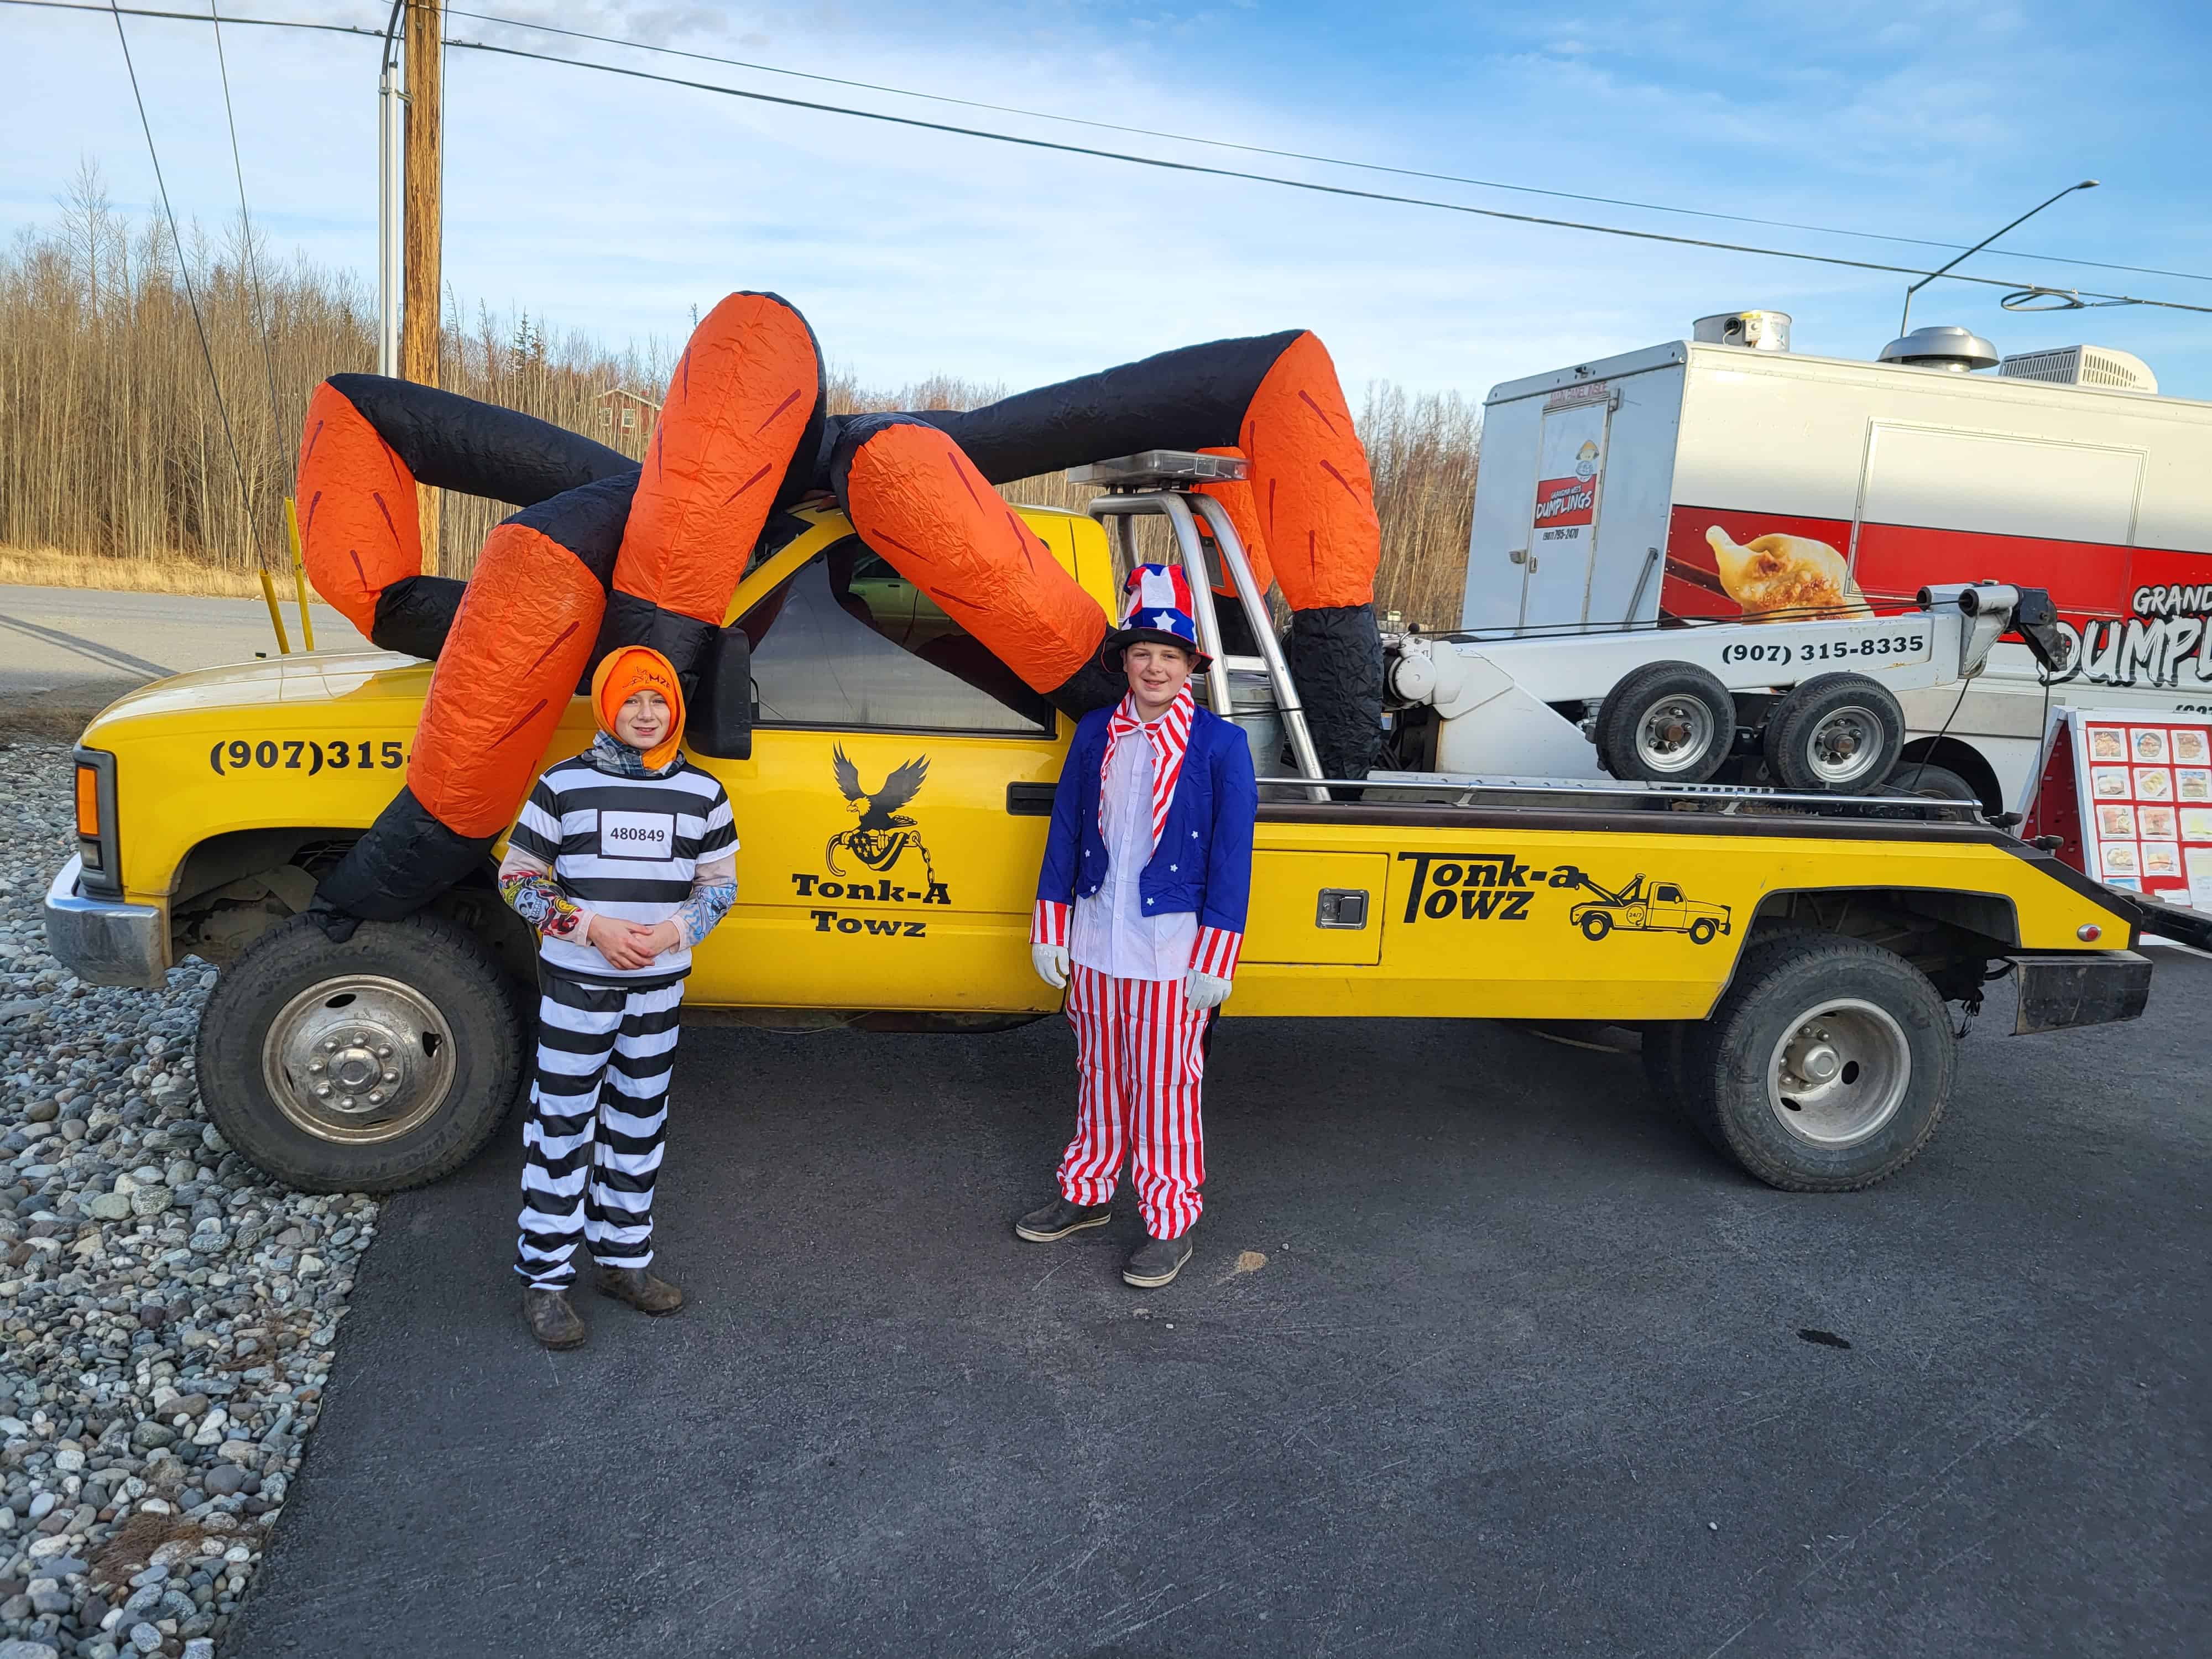 tonka towz truck decorated for Halloween with children.